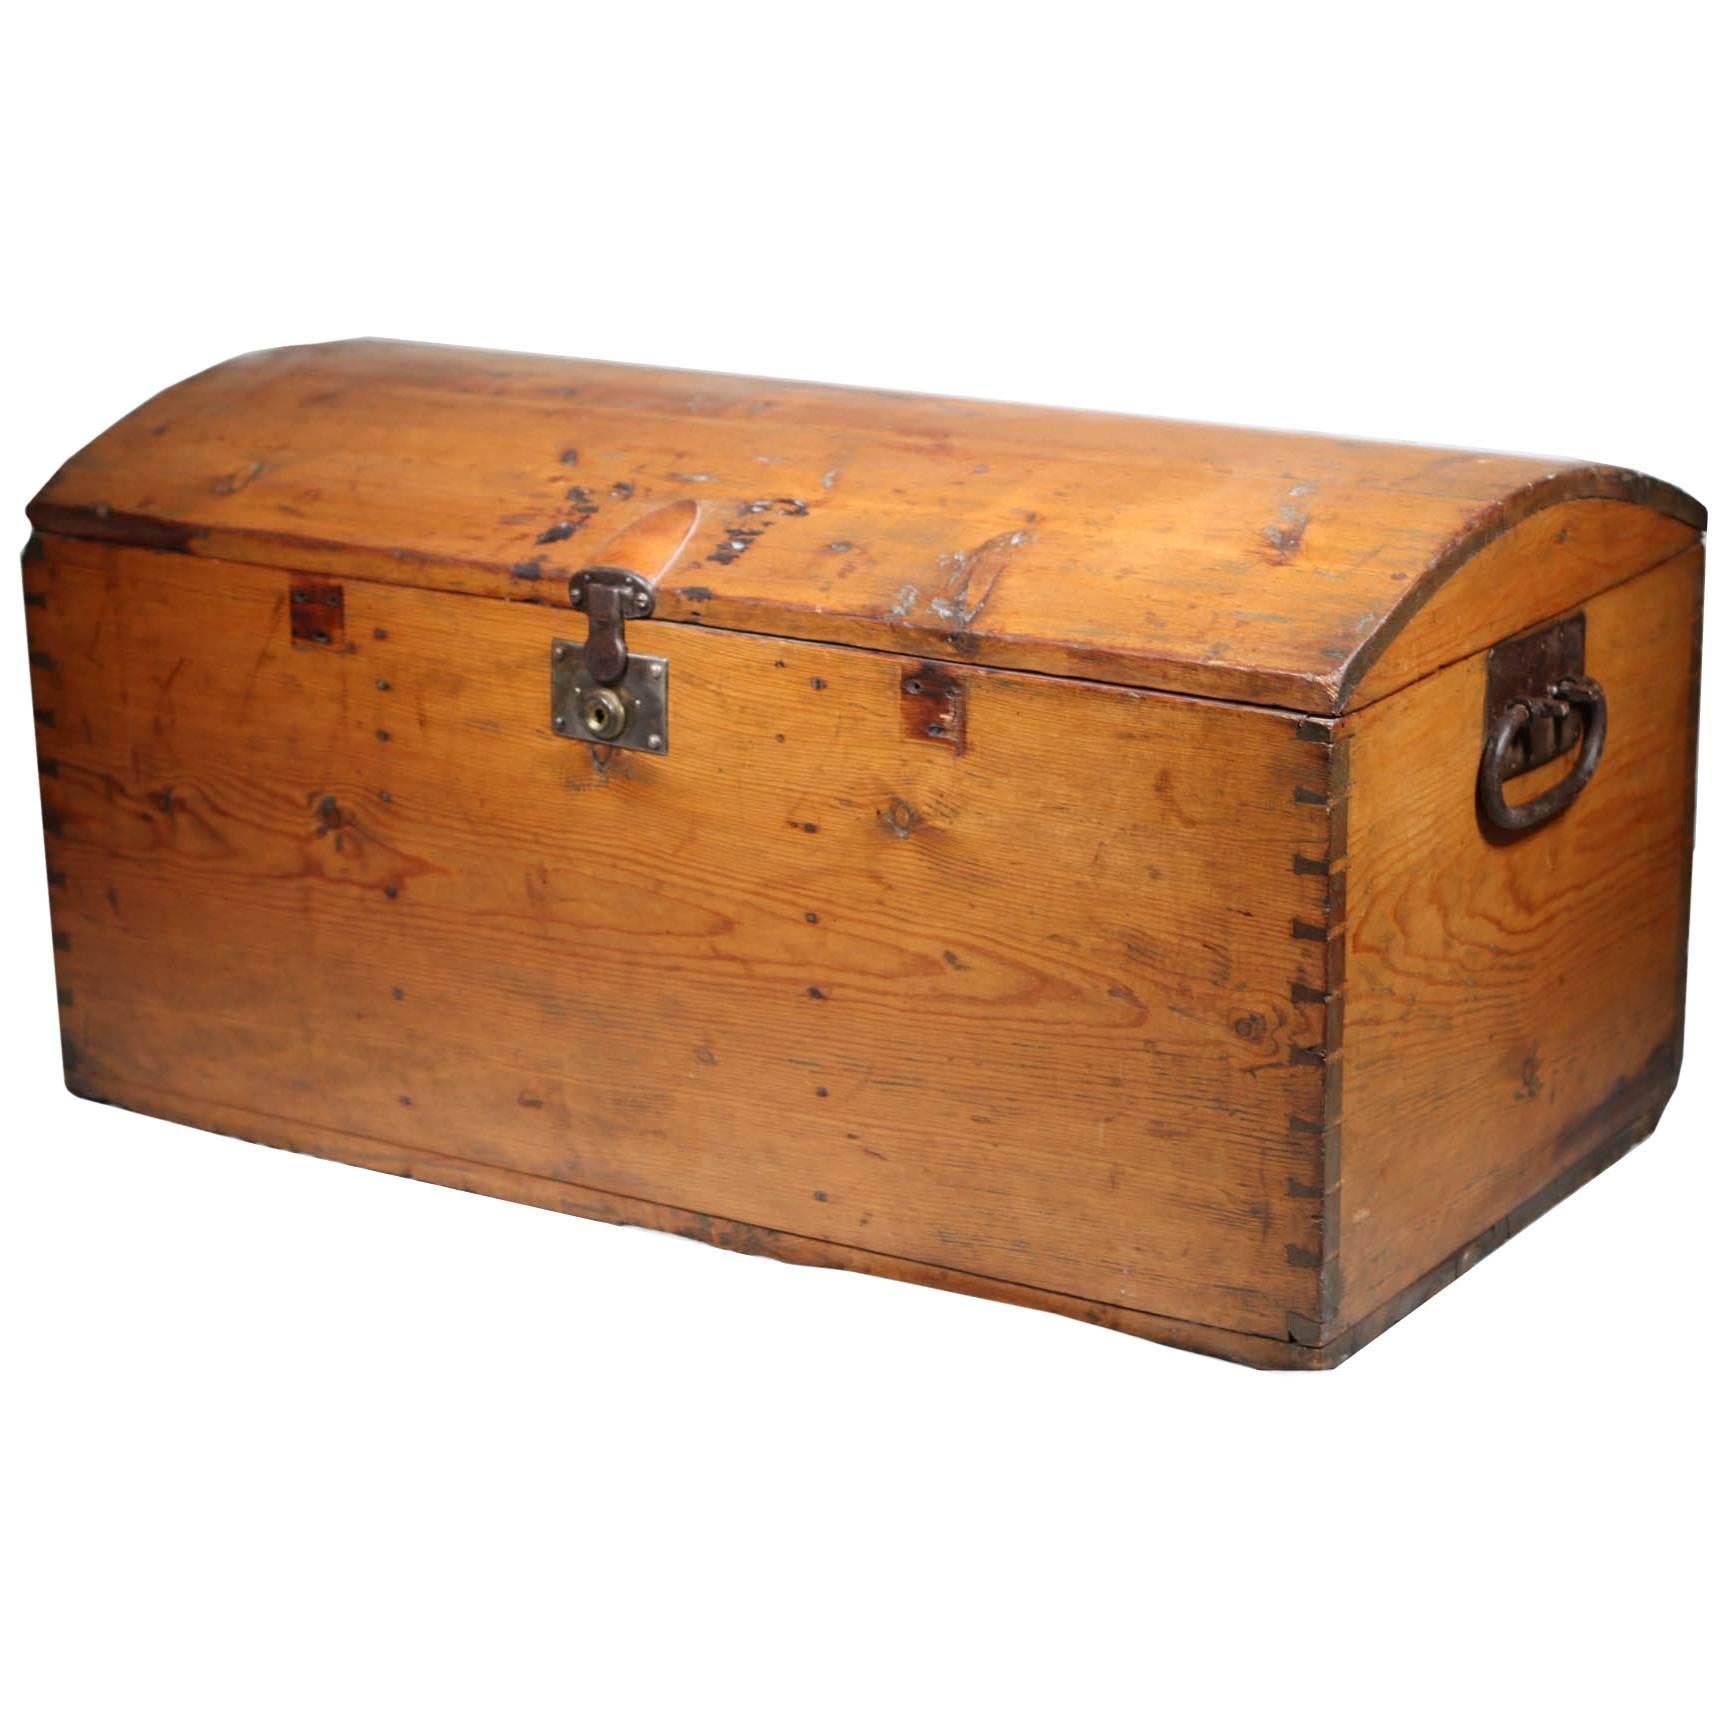 19th Century Wooden Trunk with Dovetail Joints